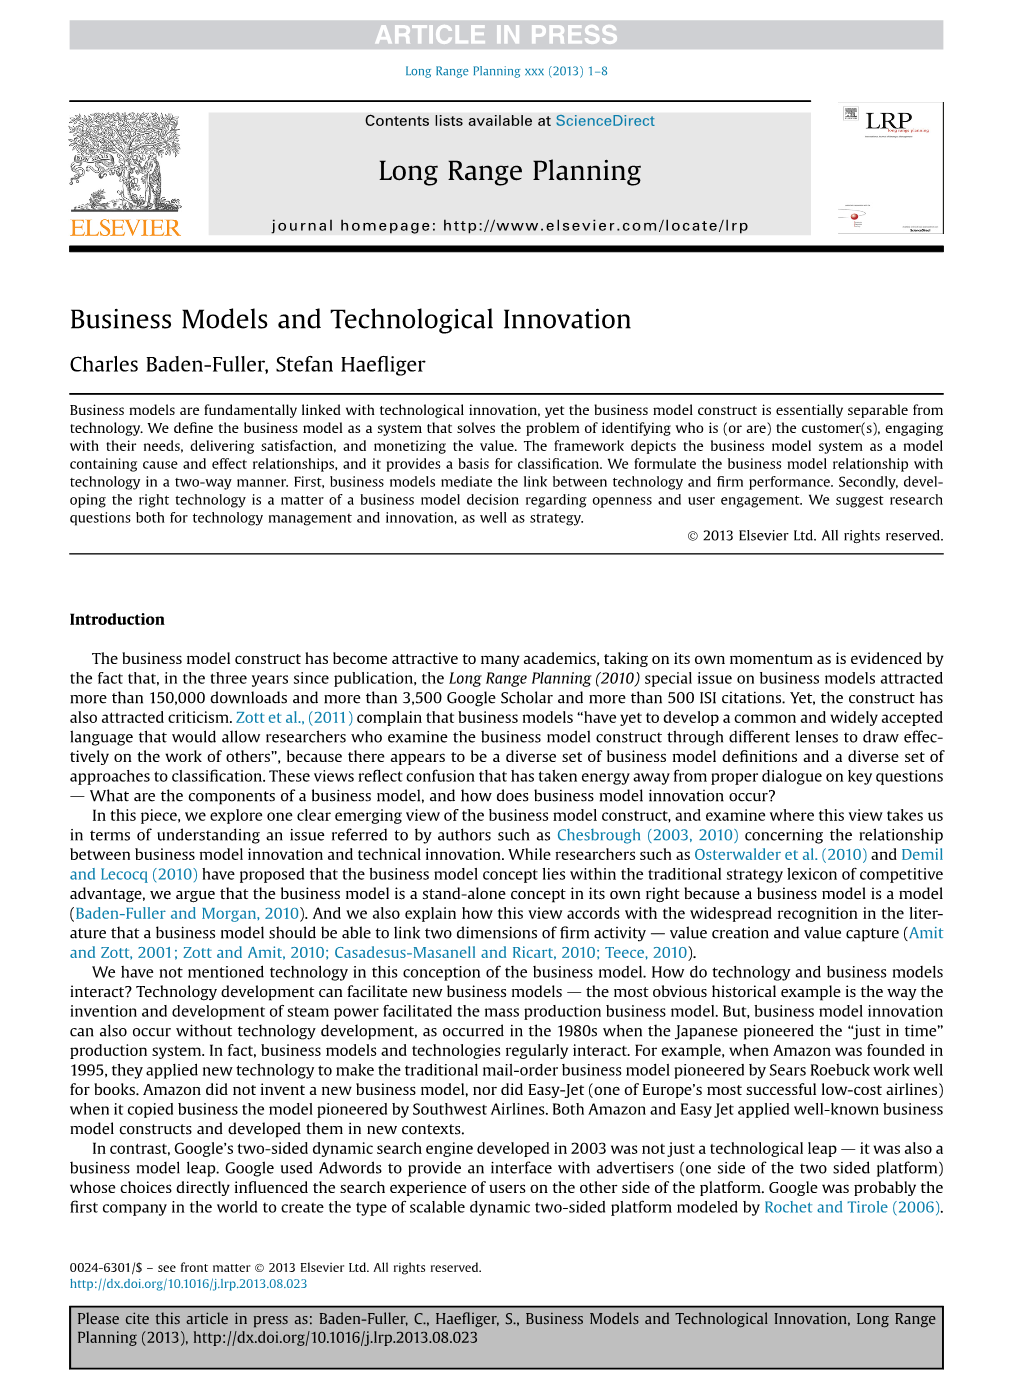 Business Models and Technological Innovation